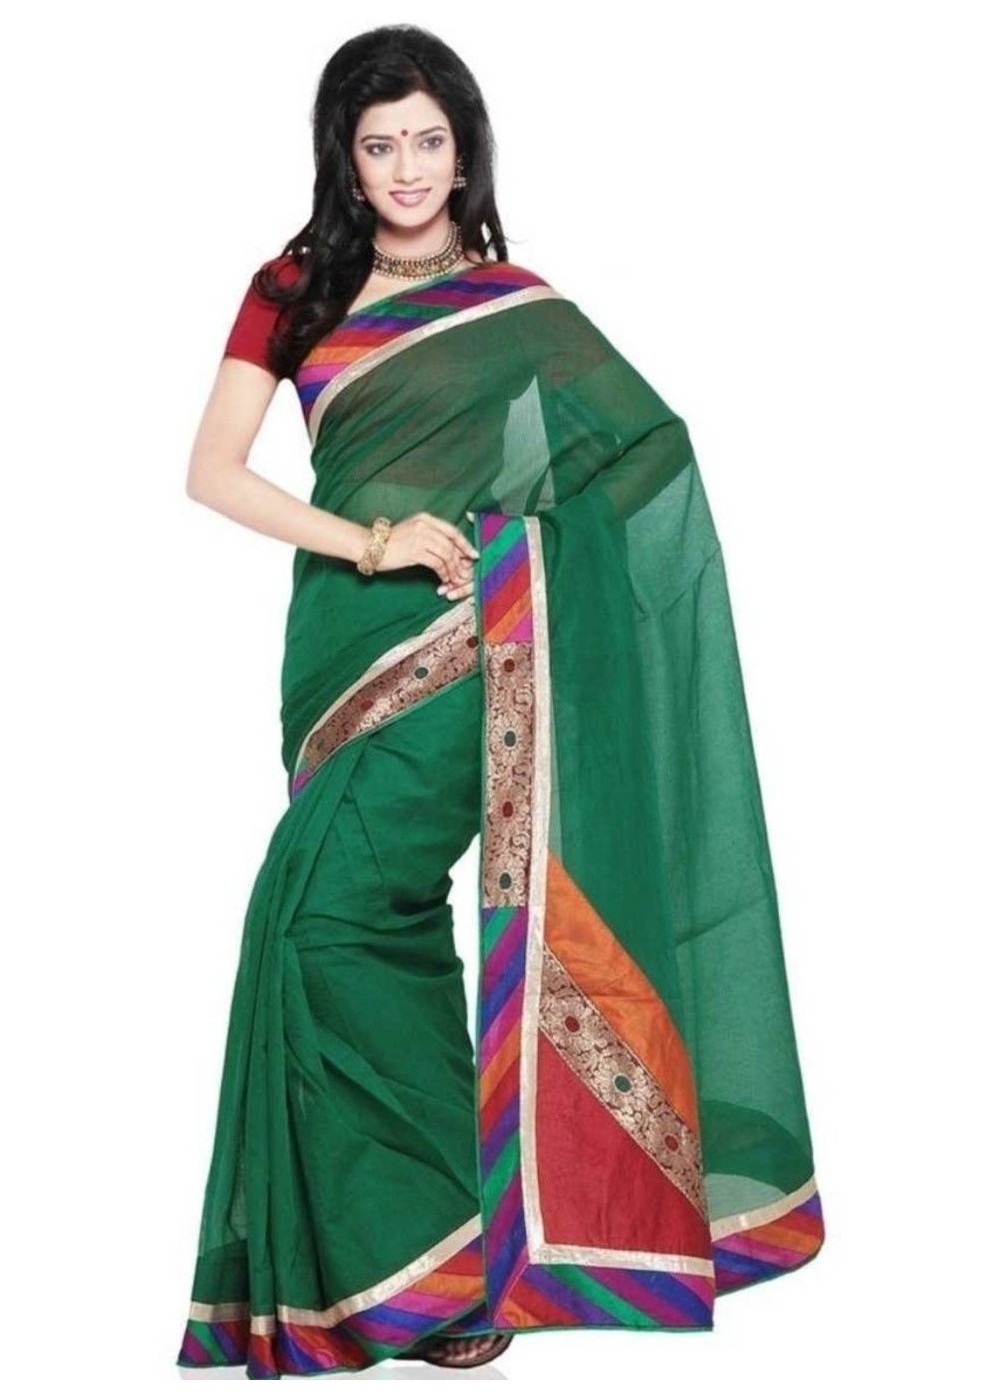 Colorful Ethnic Design Cotton Saree And Blouse Fabric